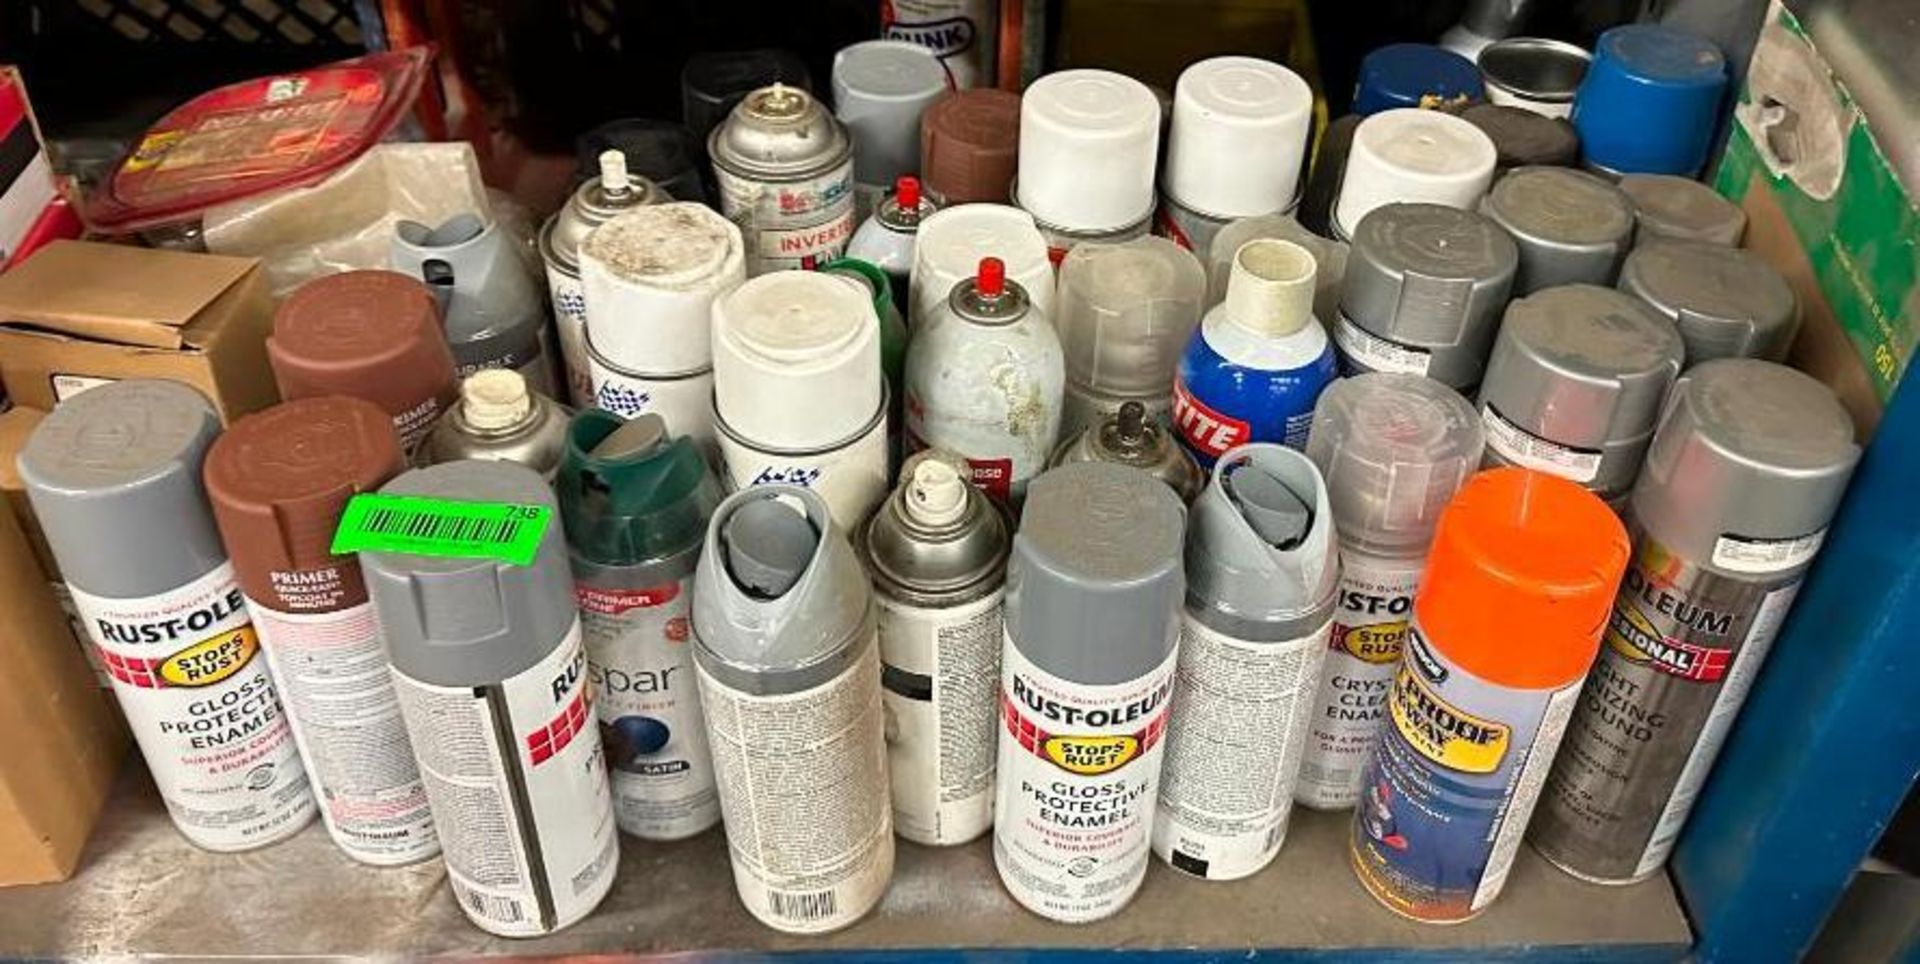 ASSORTED SPRAY PAINT AND CHEMICALS AS SHOWN